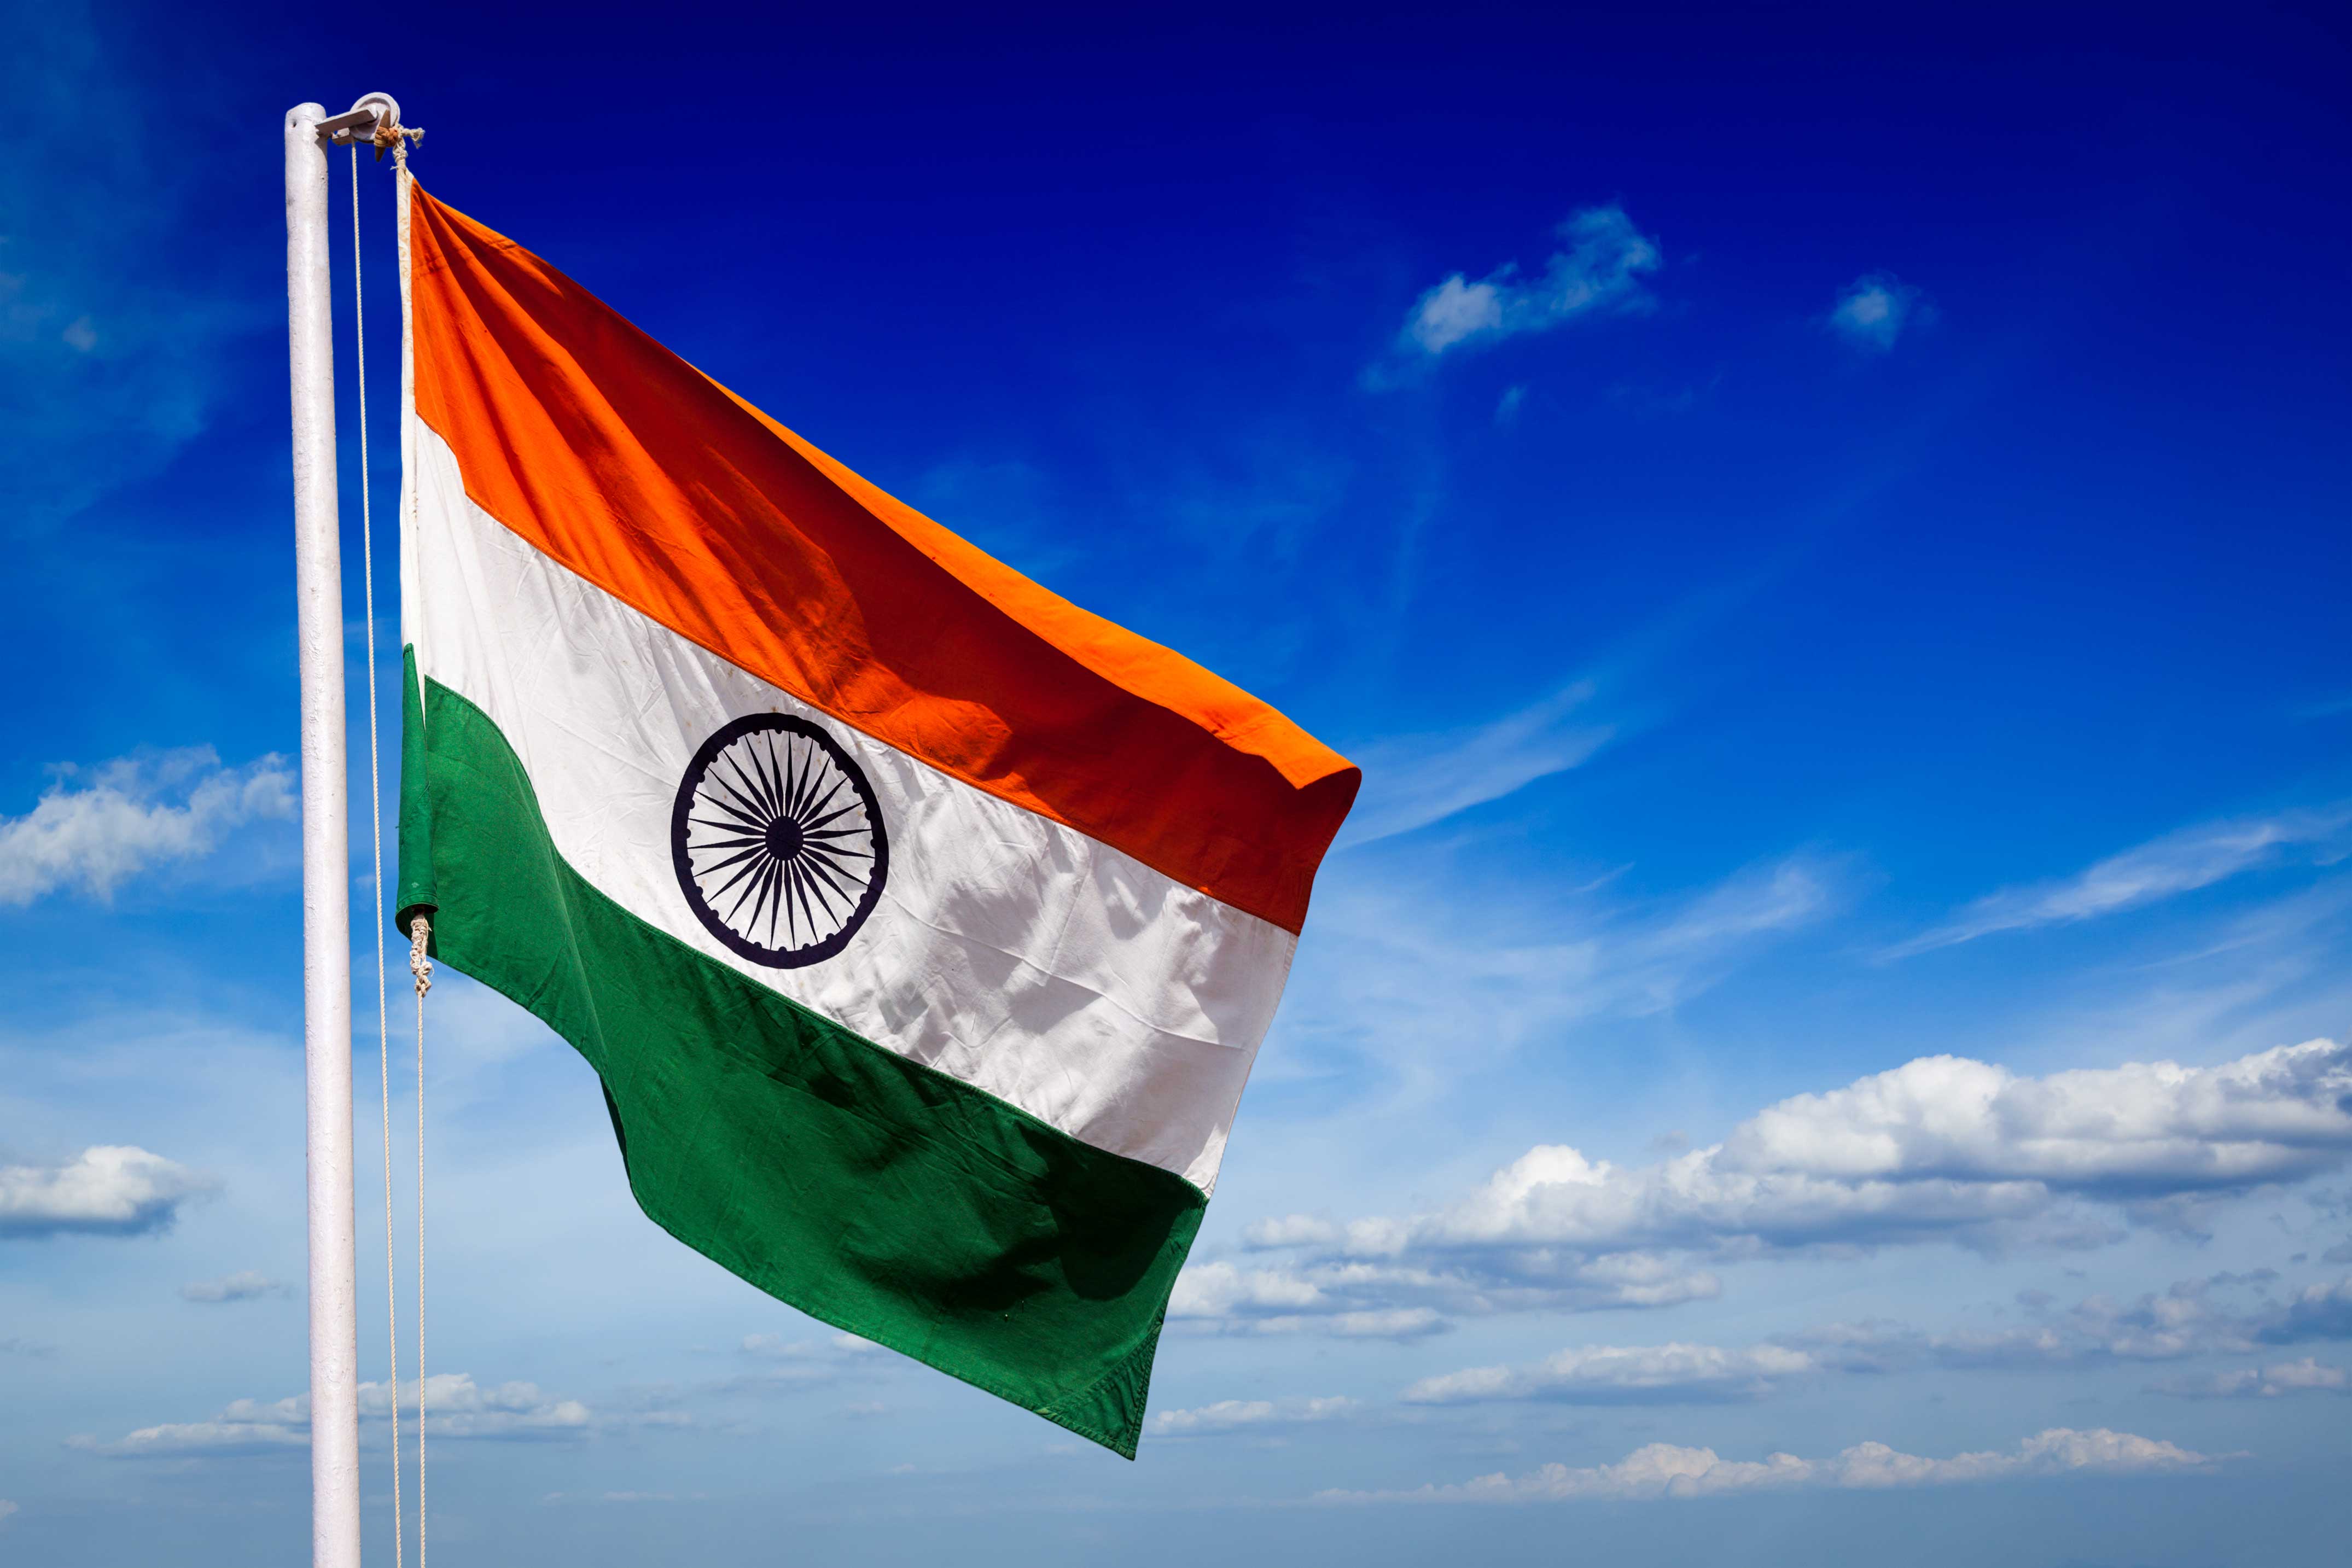 What Is The Actual Meaning Of The Indian Flag Or The 'Tiranga'